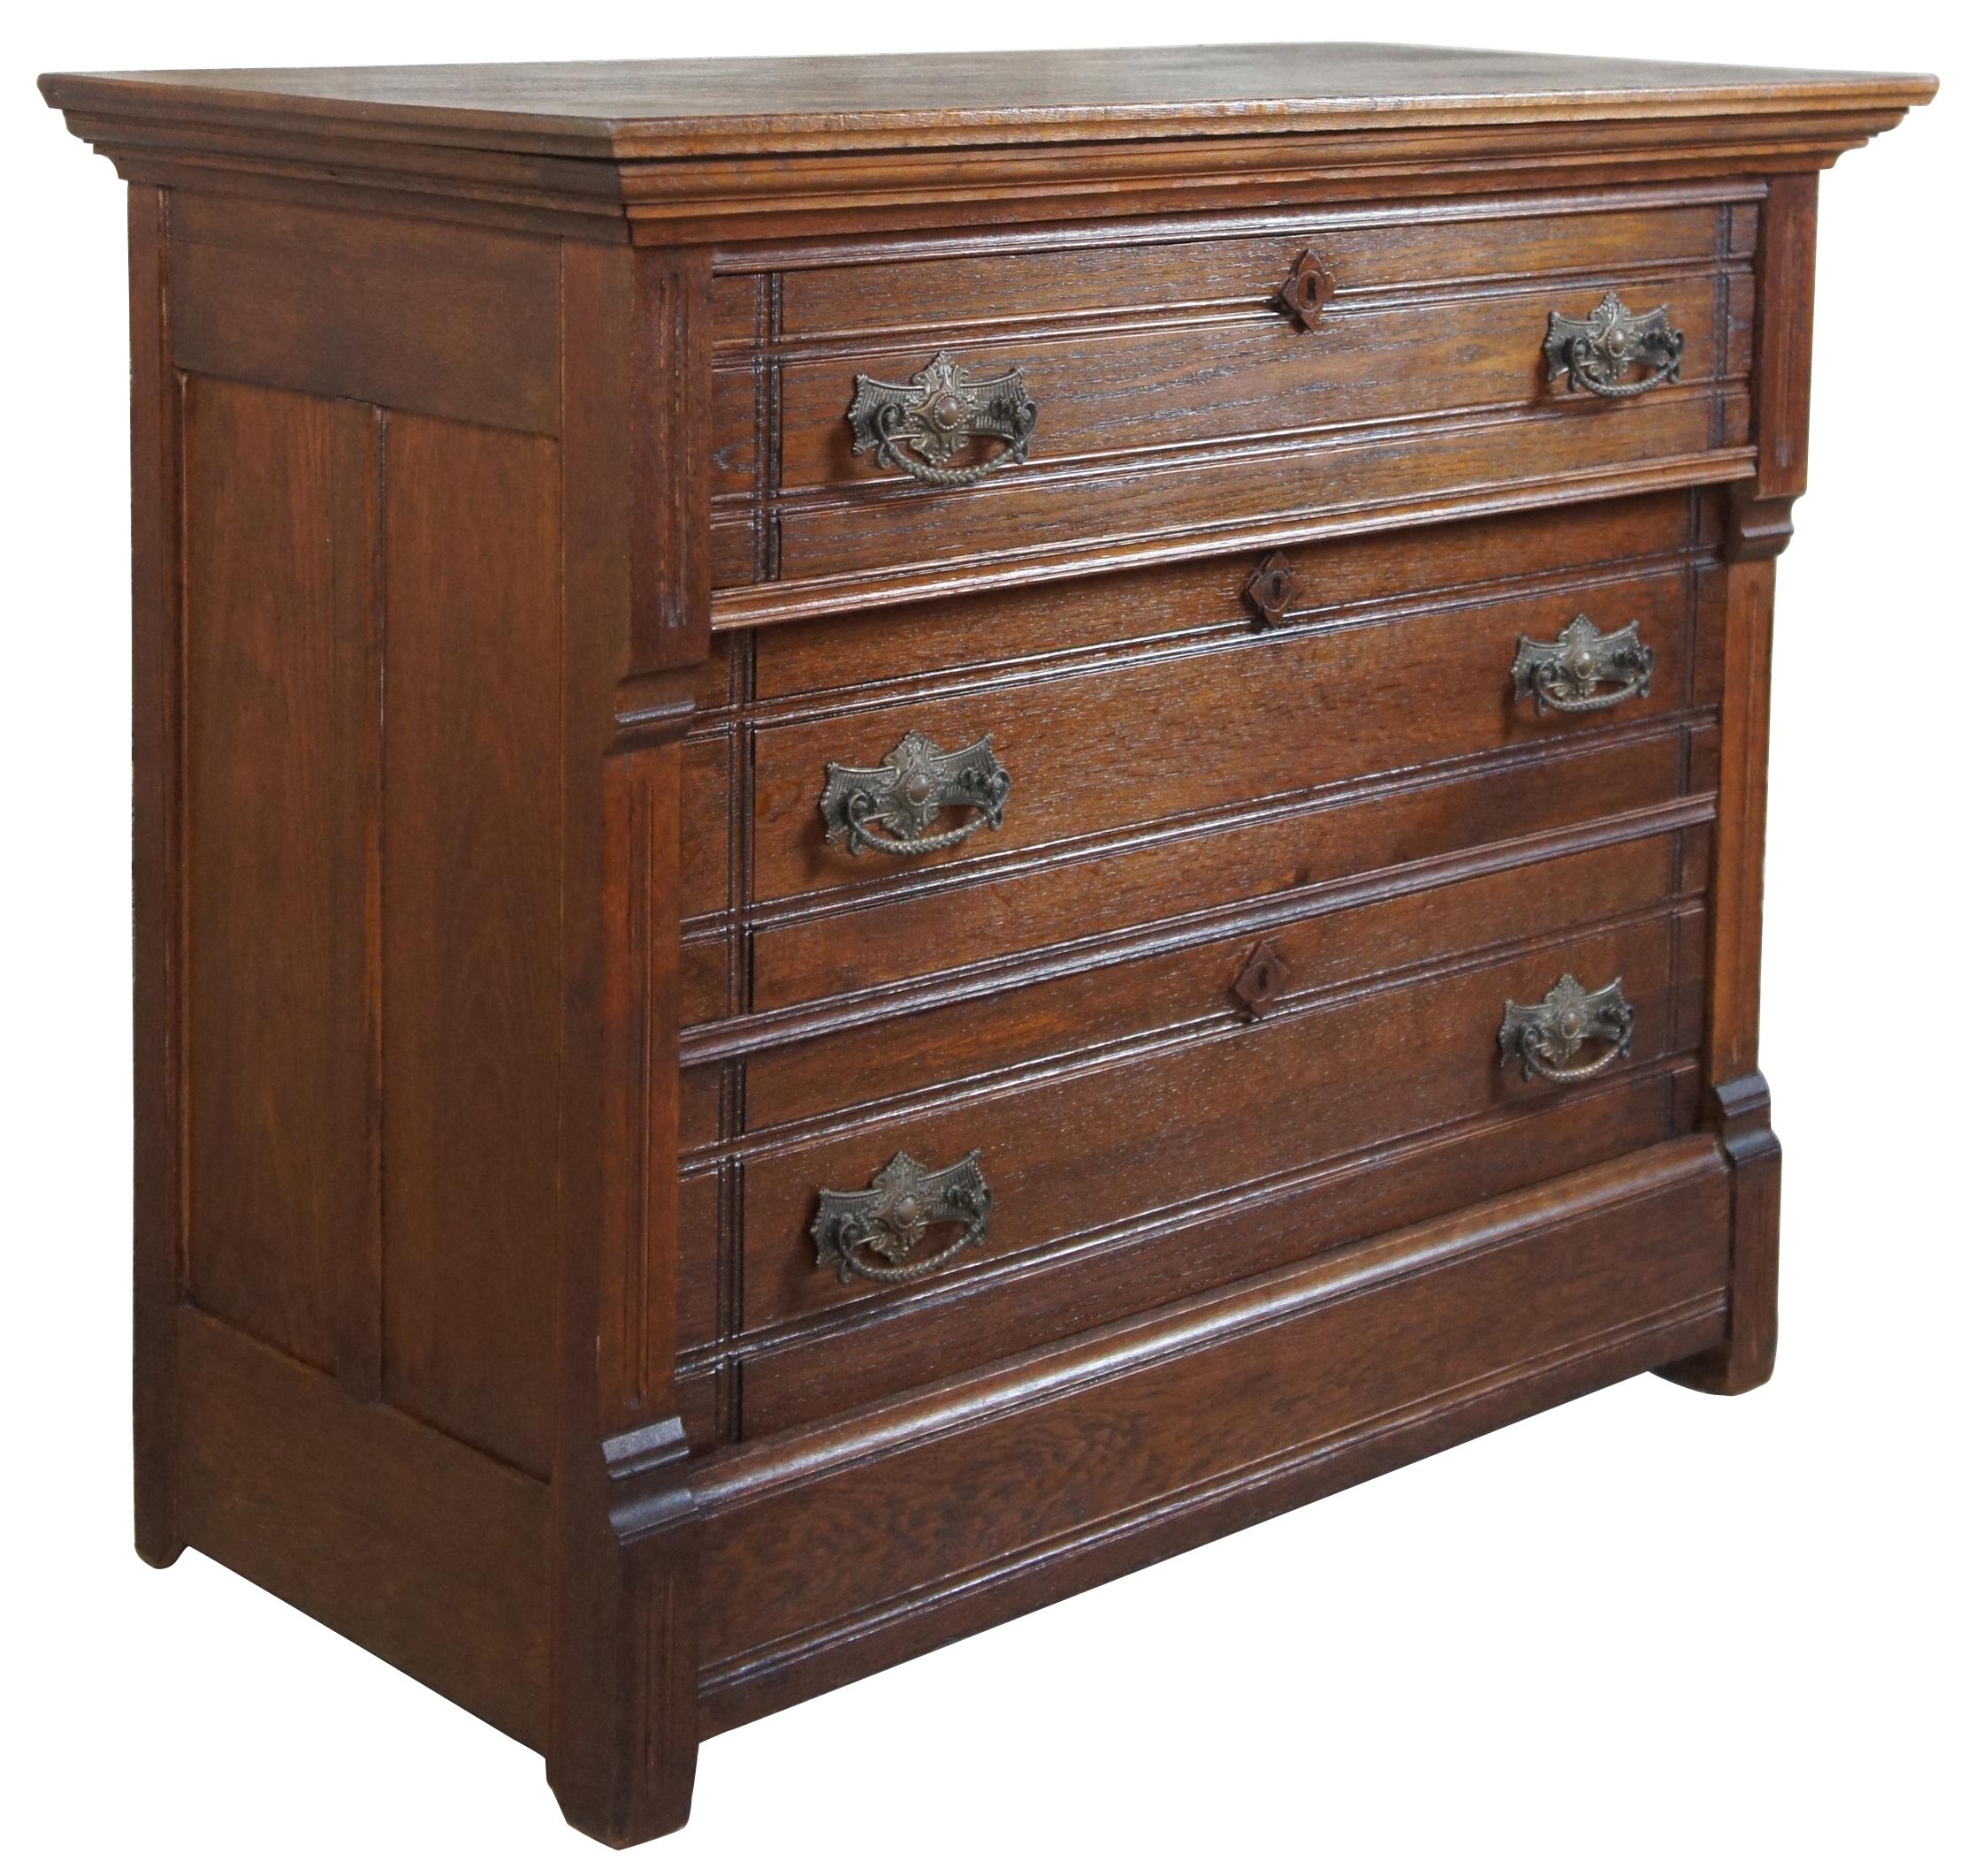 Aesthetic period three drawer dresser, circa 1880s. Made from oak with ornate brass hardware. The drawers are constructed using the Knapp Joint. The Knapp joint was developed during the late Victoria Era in post-Civil War United States. It was